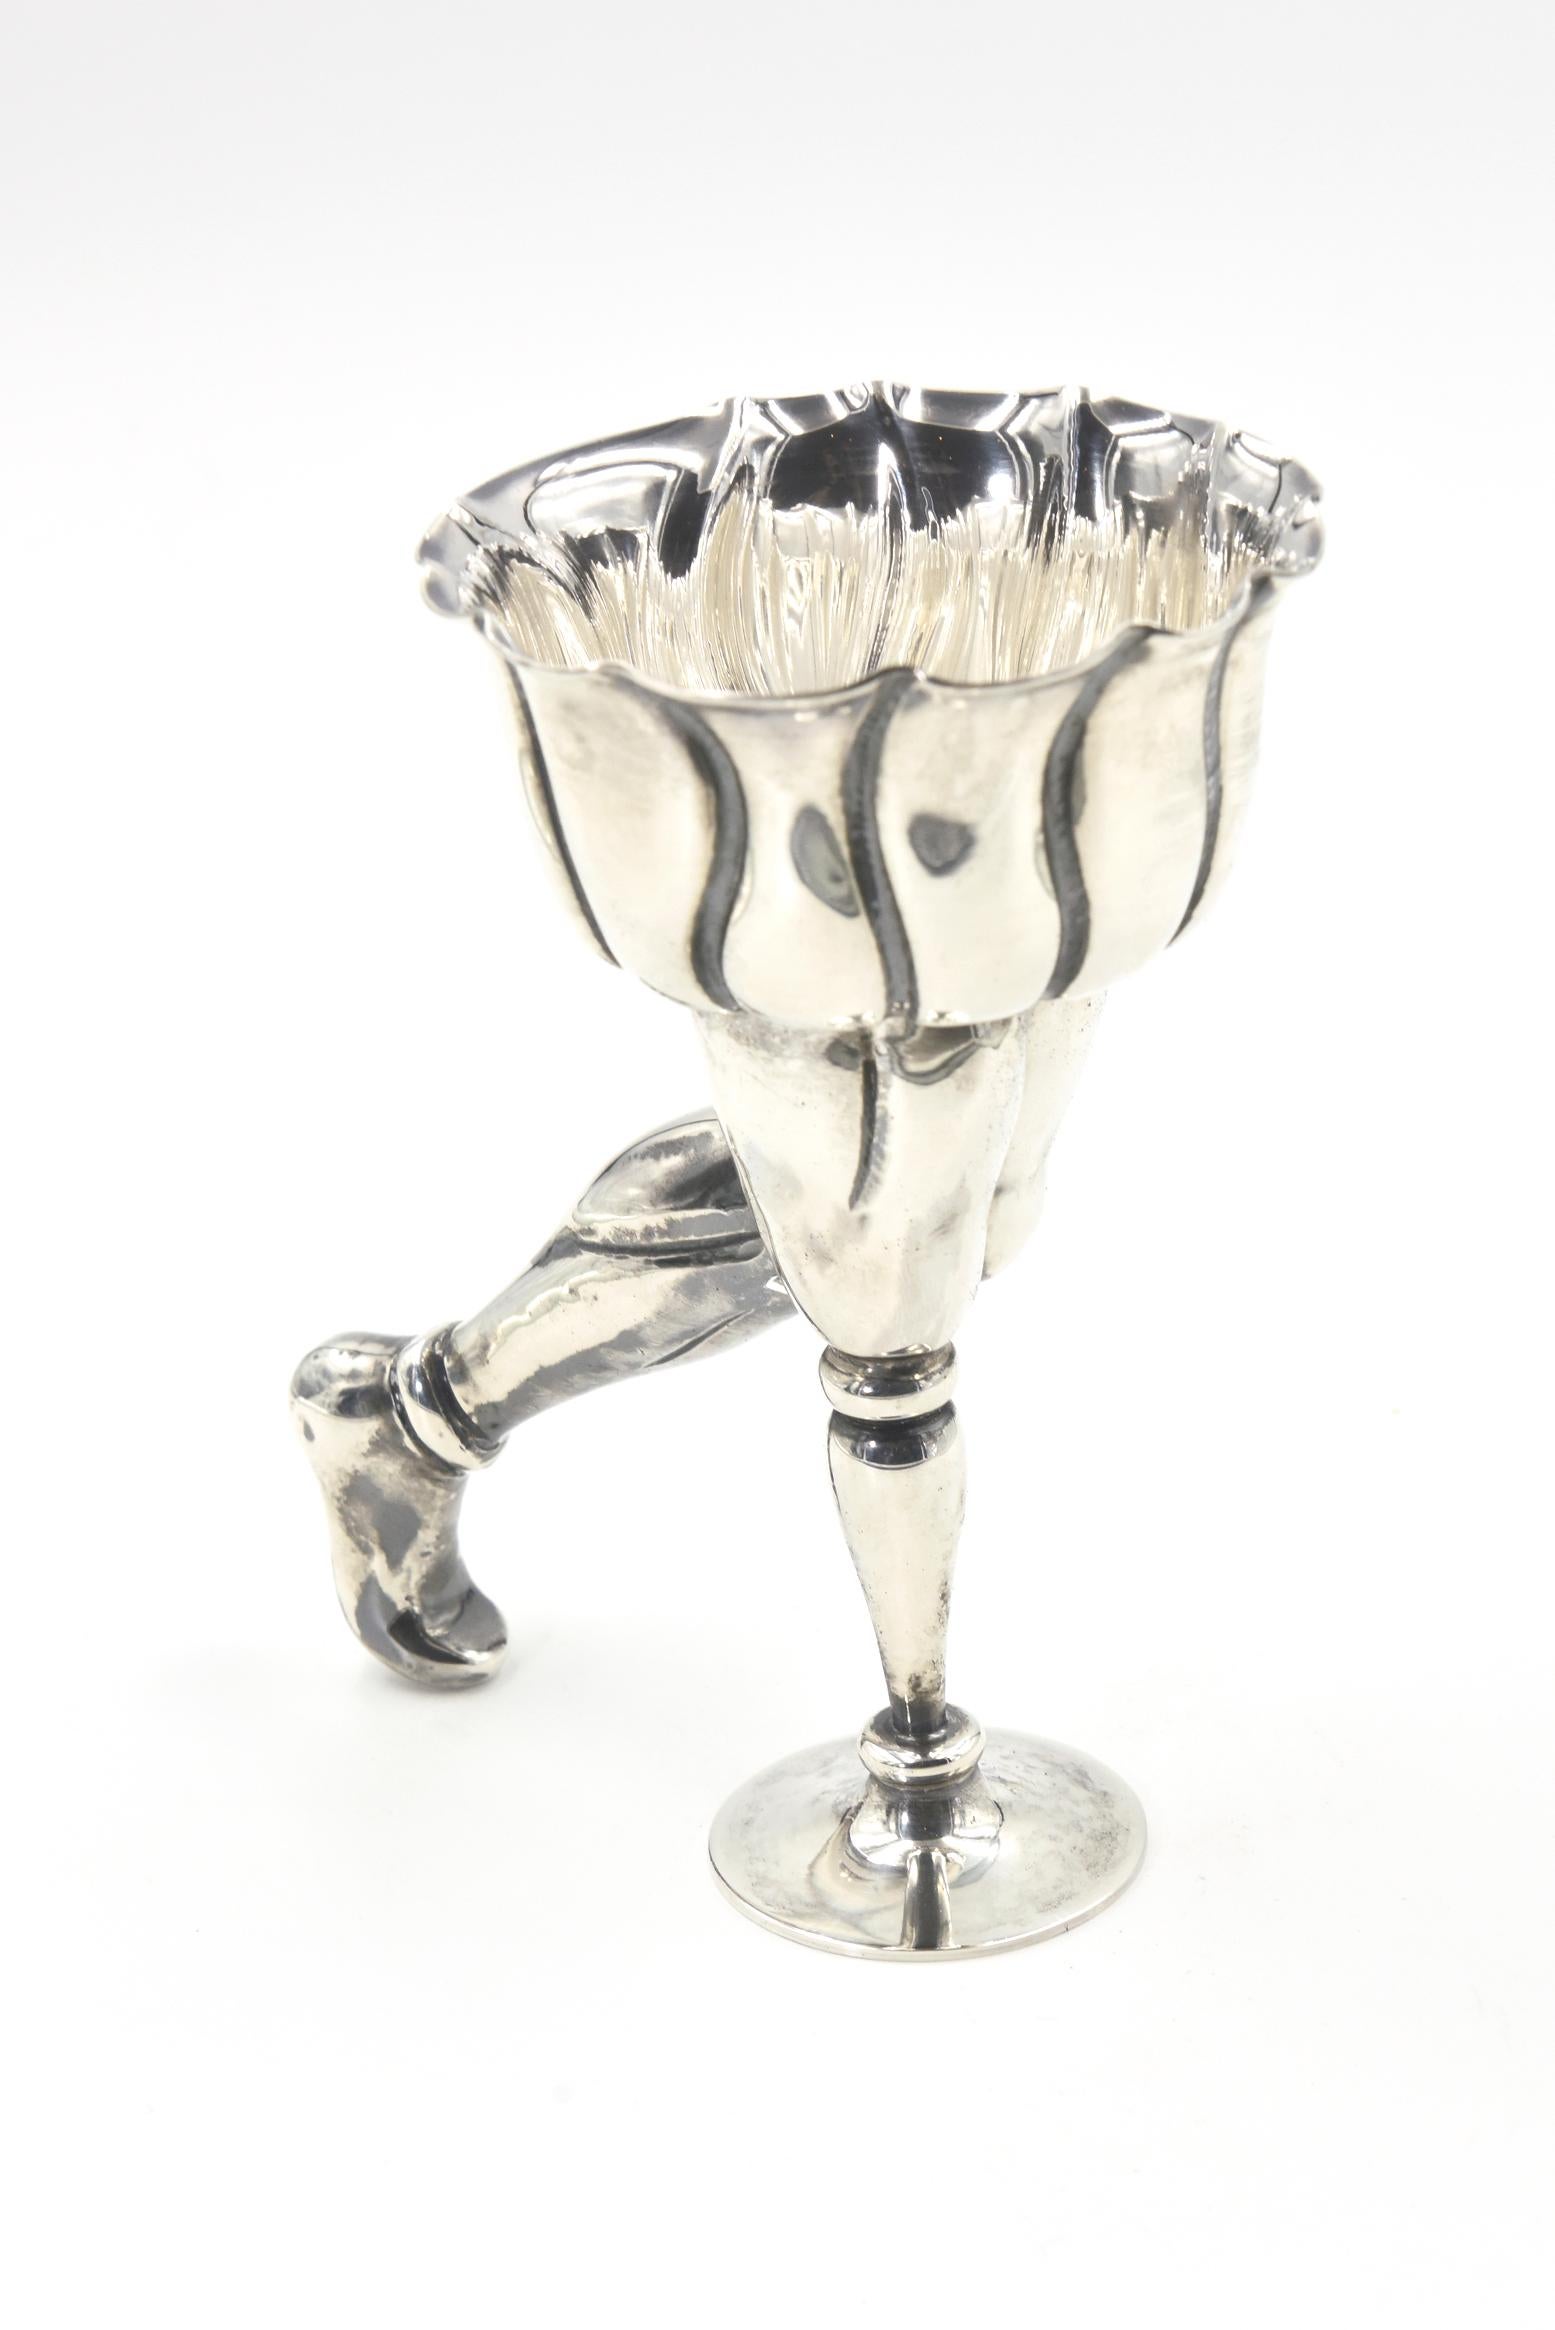 Italian Rare Pampaloni Sterling Footed Figural Wine Cup from Bichierografia Collection